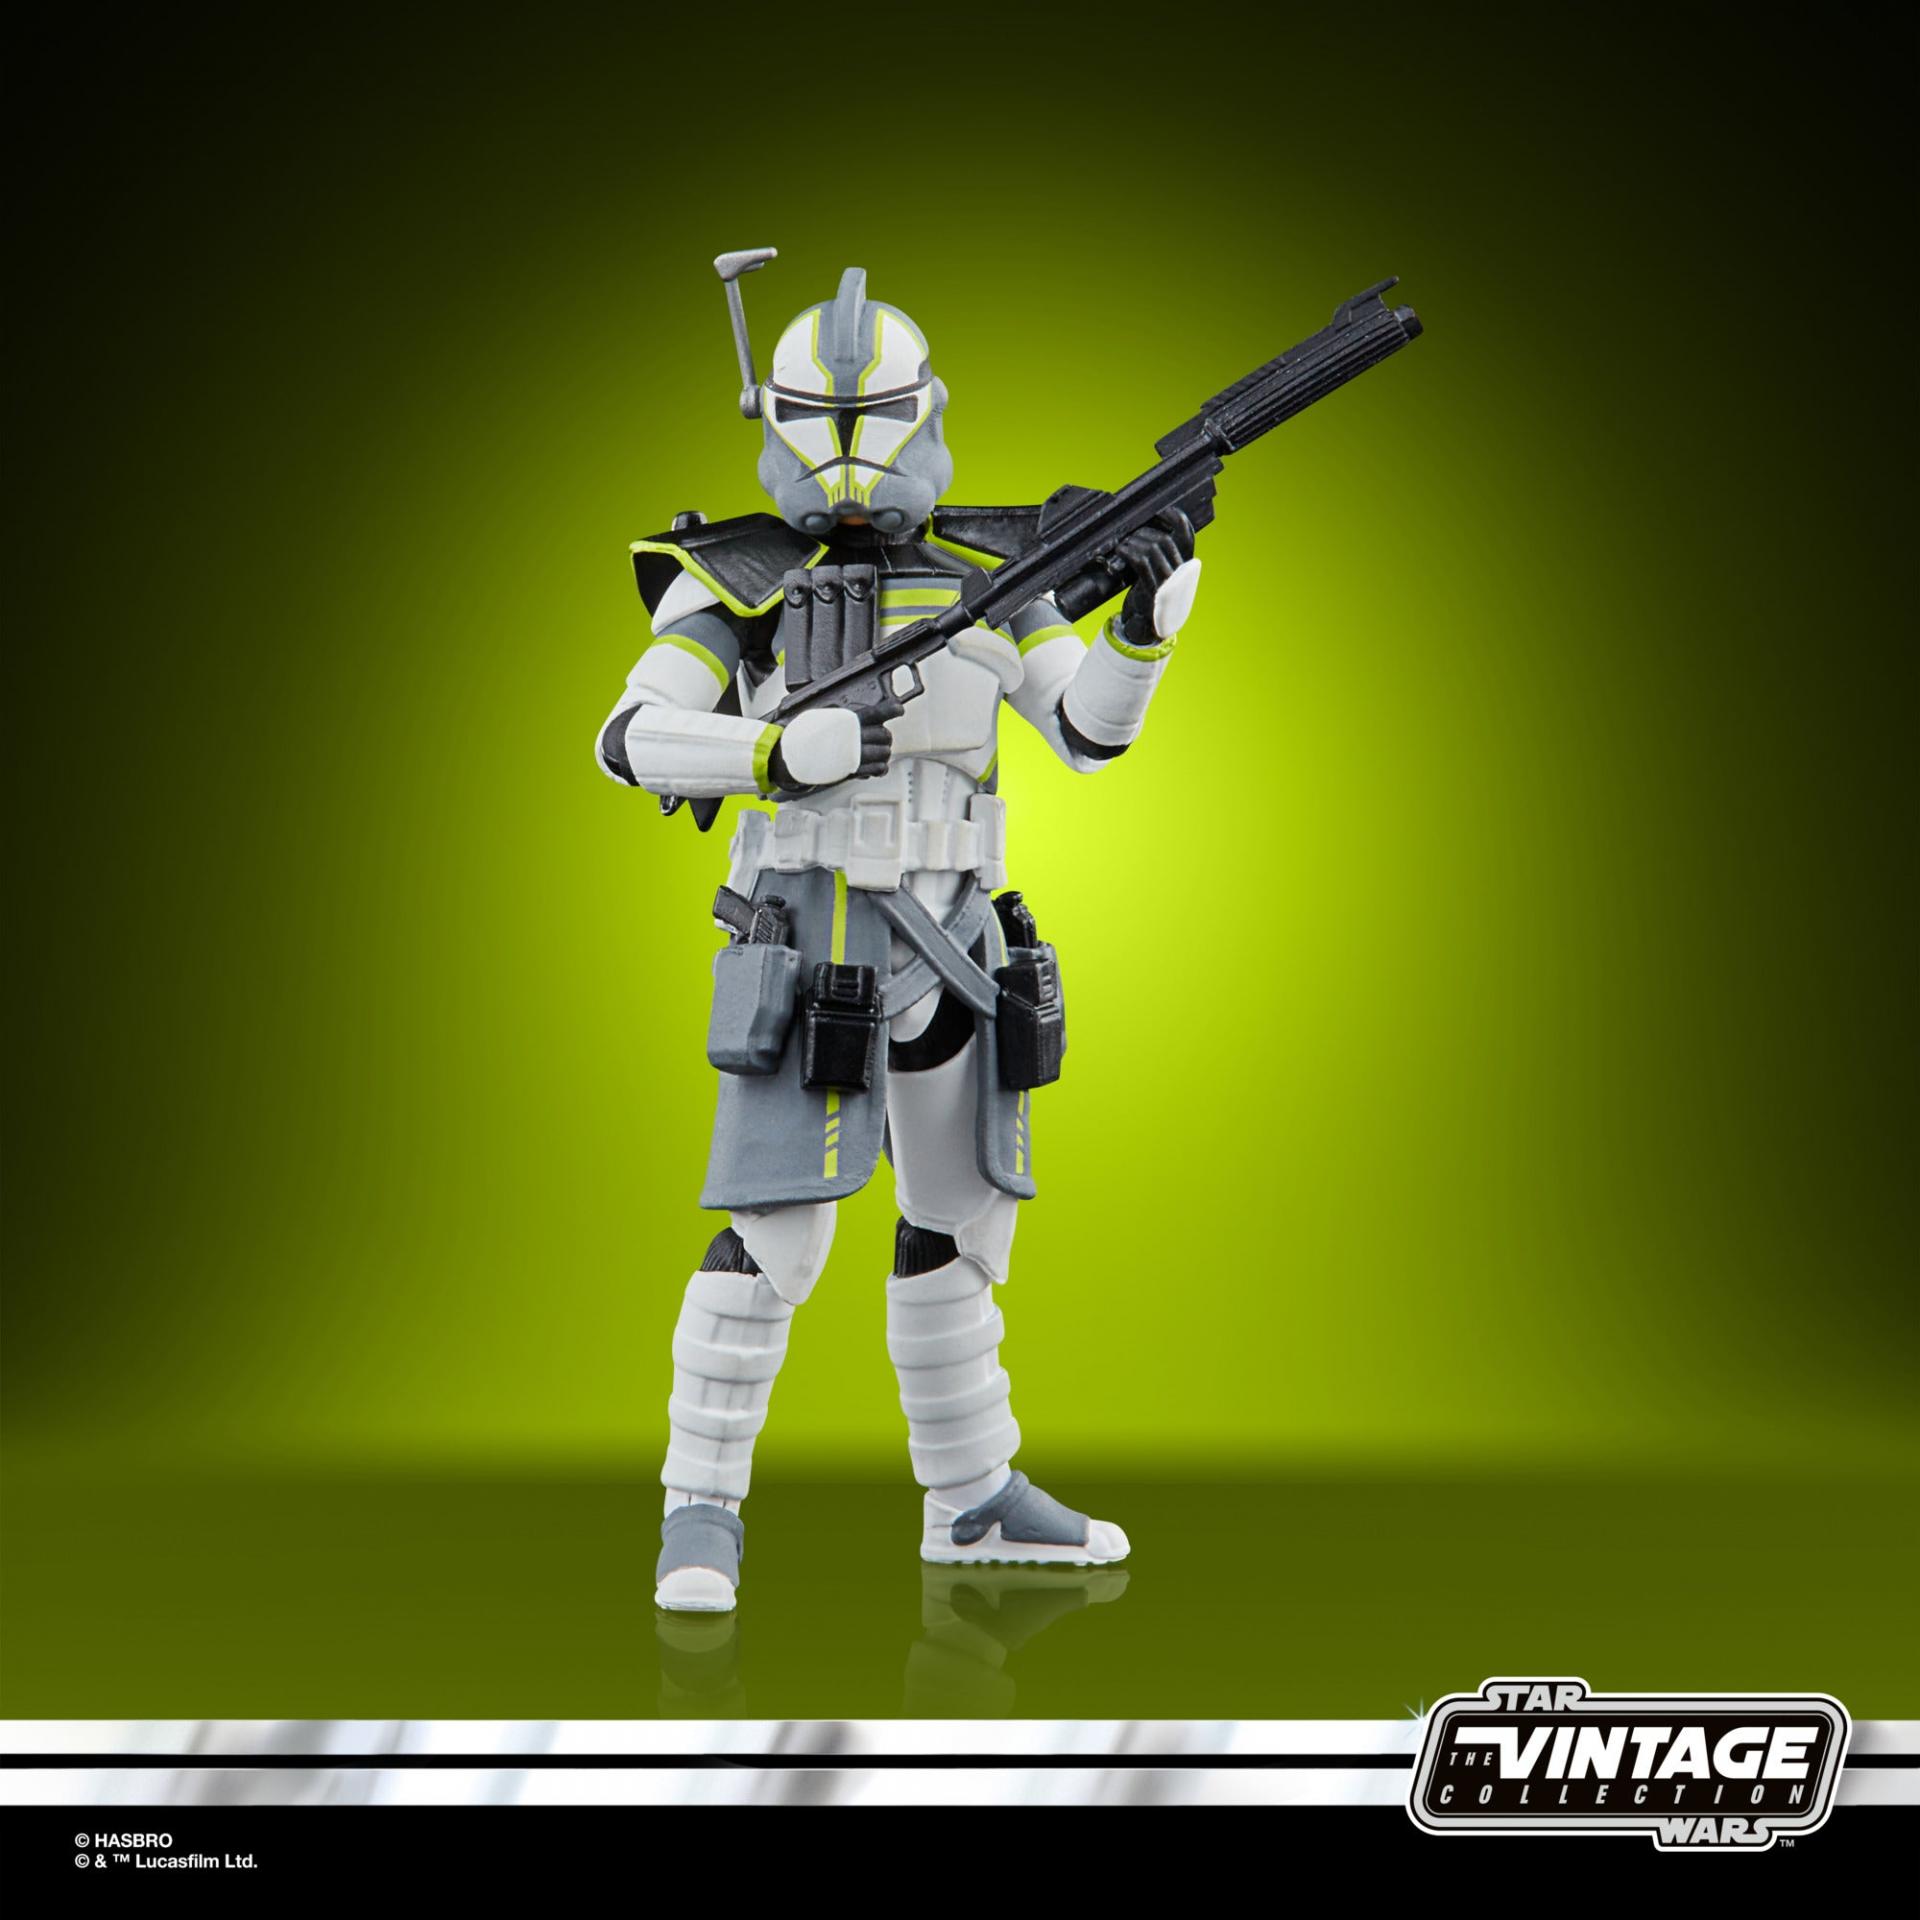 Star wars the vintage collection gaming greats arc trooper lambent seeker jawascave 4